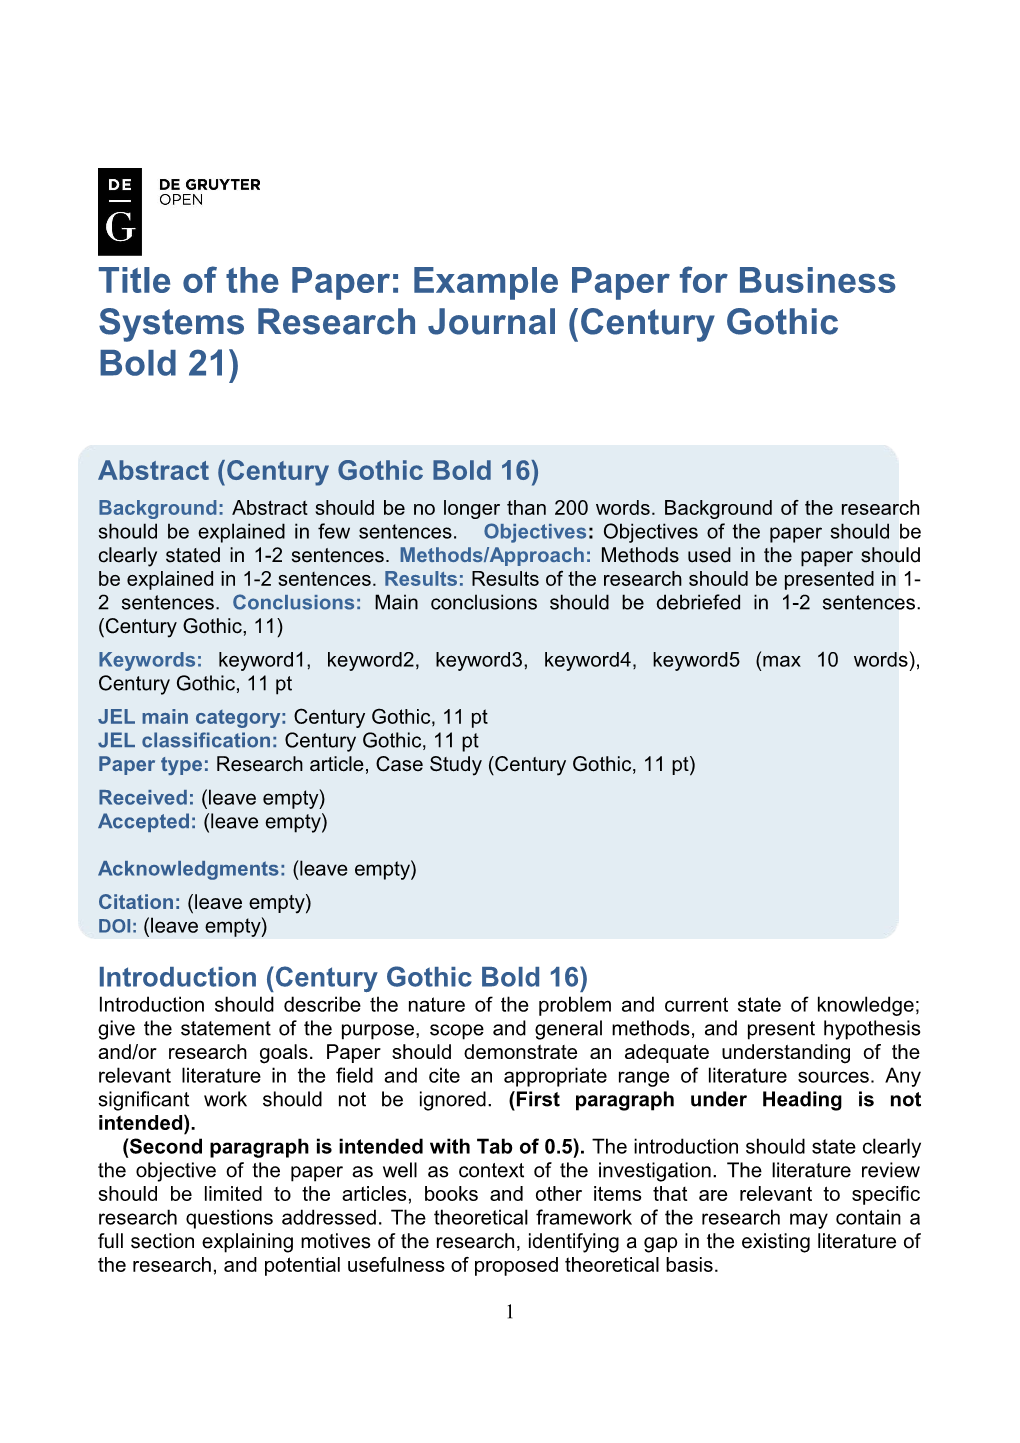 Title of the Paper: Example Paper for Business Systems Research Journal